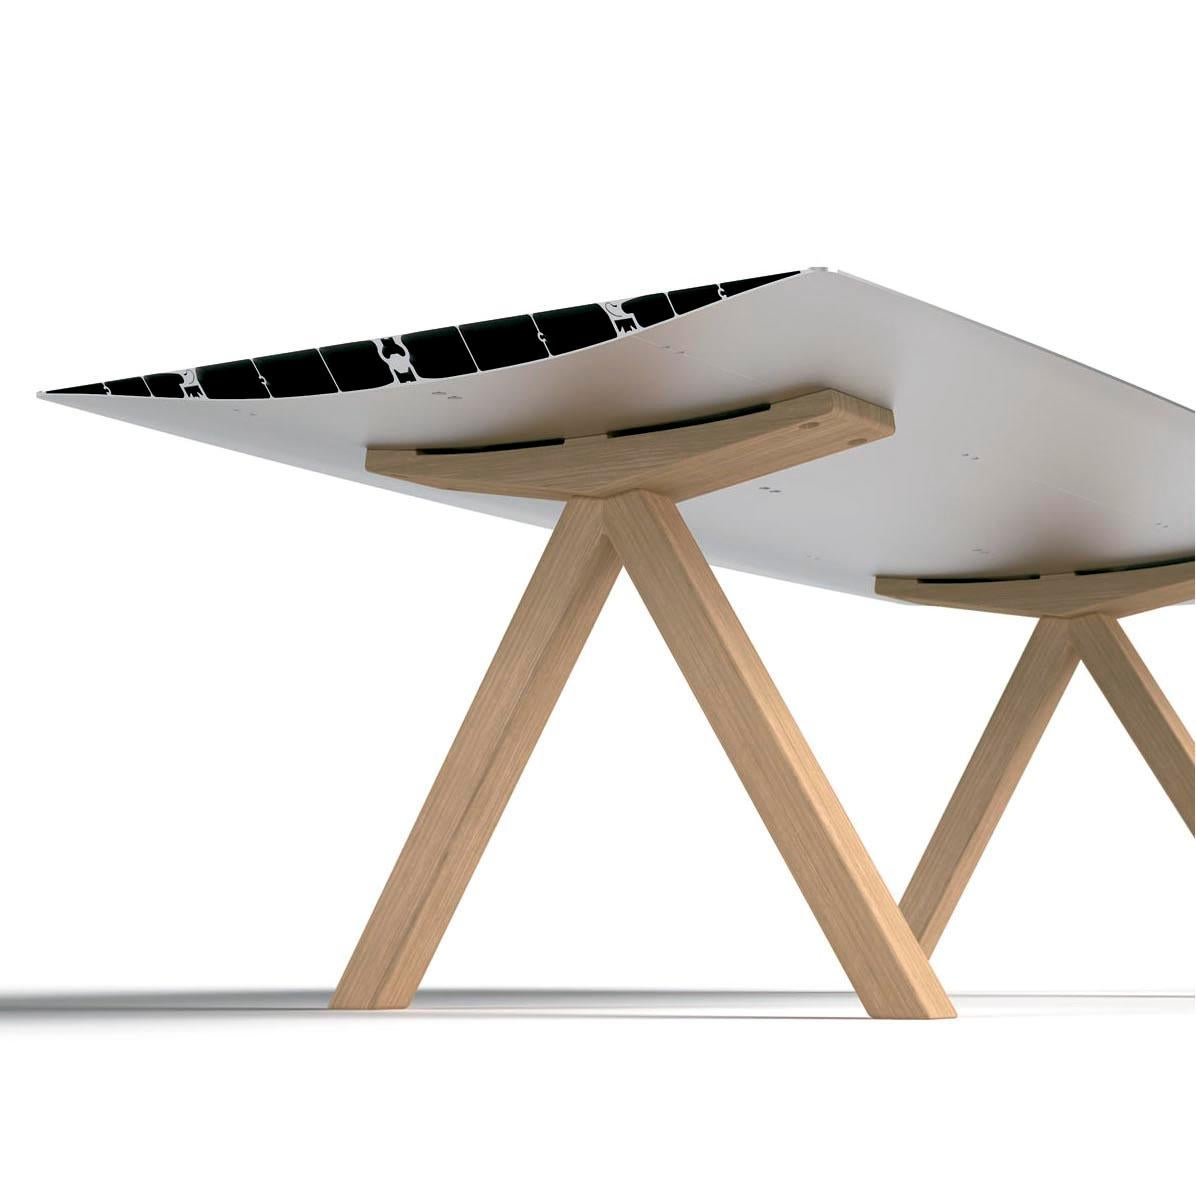 Top in bevel edged extruded aluminum. Surface laminated in oak effect. Natural ash wooden legs.

Measures: 120 D x 360 W x 73.5 H cm.

Reddot design award best of de best 2011.

Tabletop in extrusion aluminum with open ends cut at 45º.

The